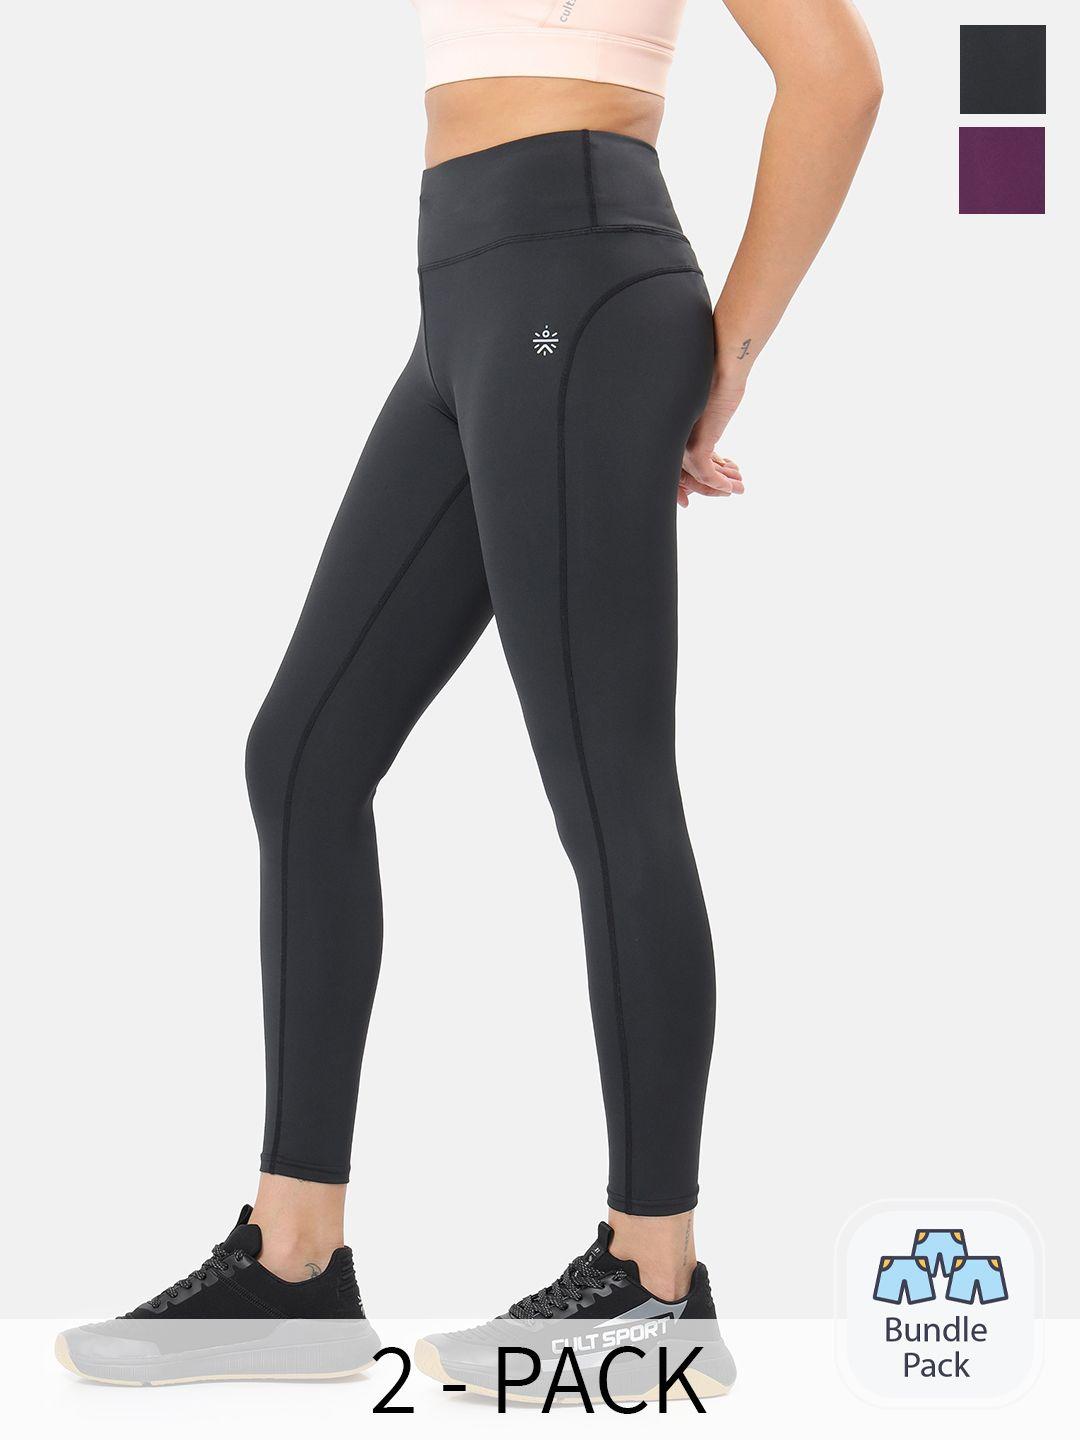 cultsport pack of 2 high waist compression tights